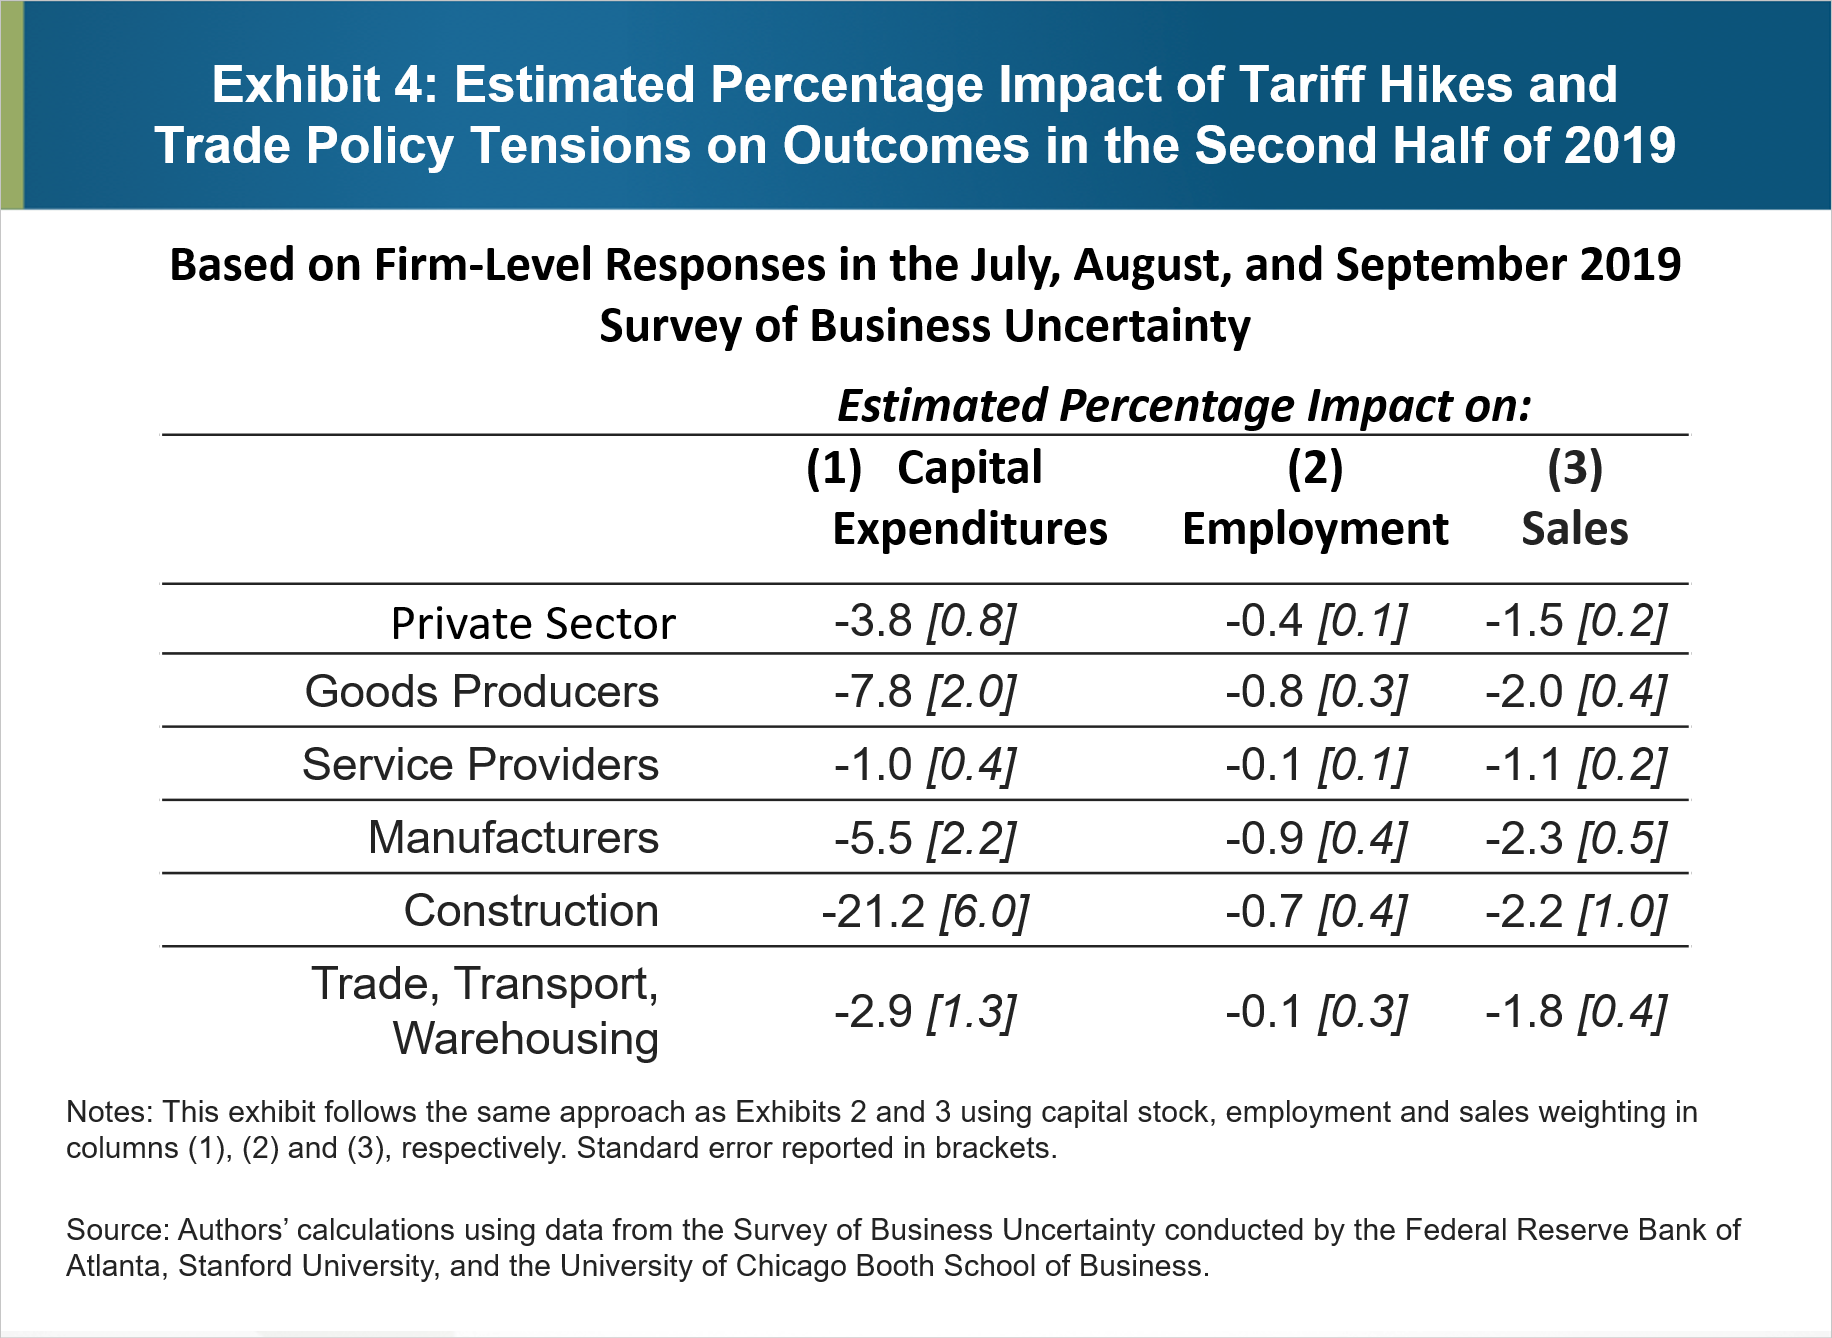 Exhibit 4: Estimated Percentage Impact of Tariff Hikes and Trade Policy Tensions on Outcomes in the Second Half of 2019